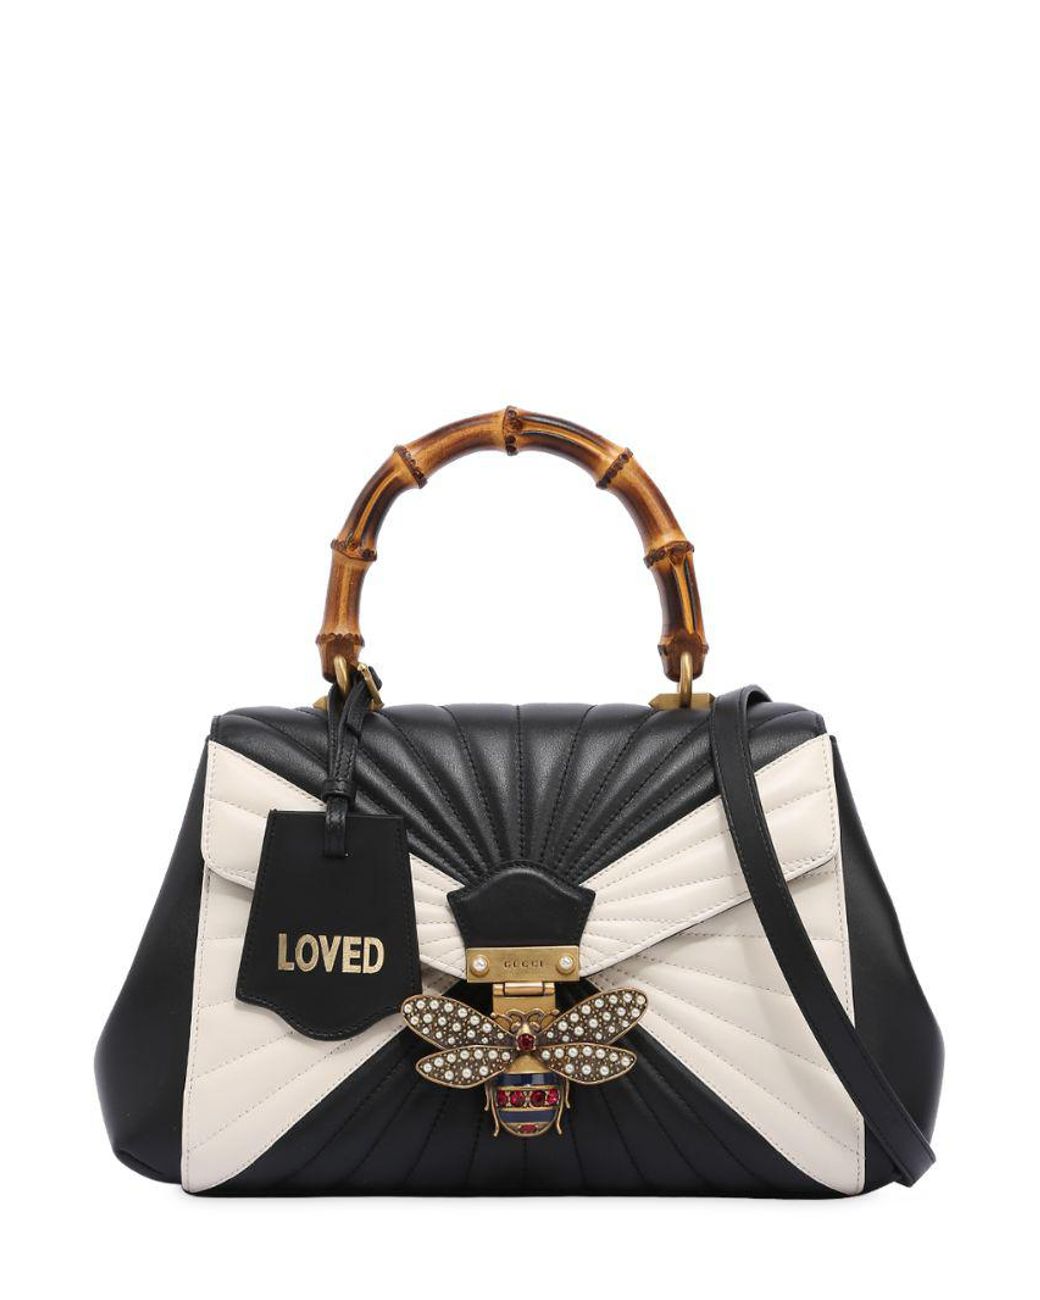 Gucci Bee Two Tone Leather & Bamboo Bag in Black